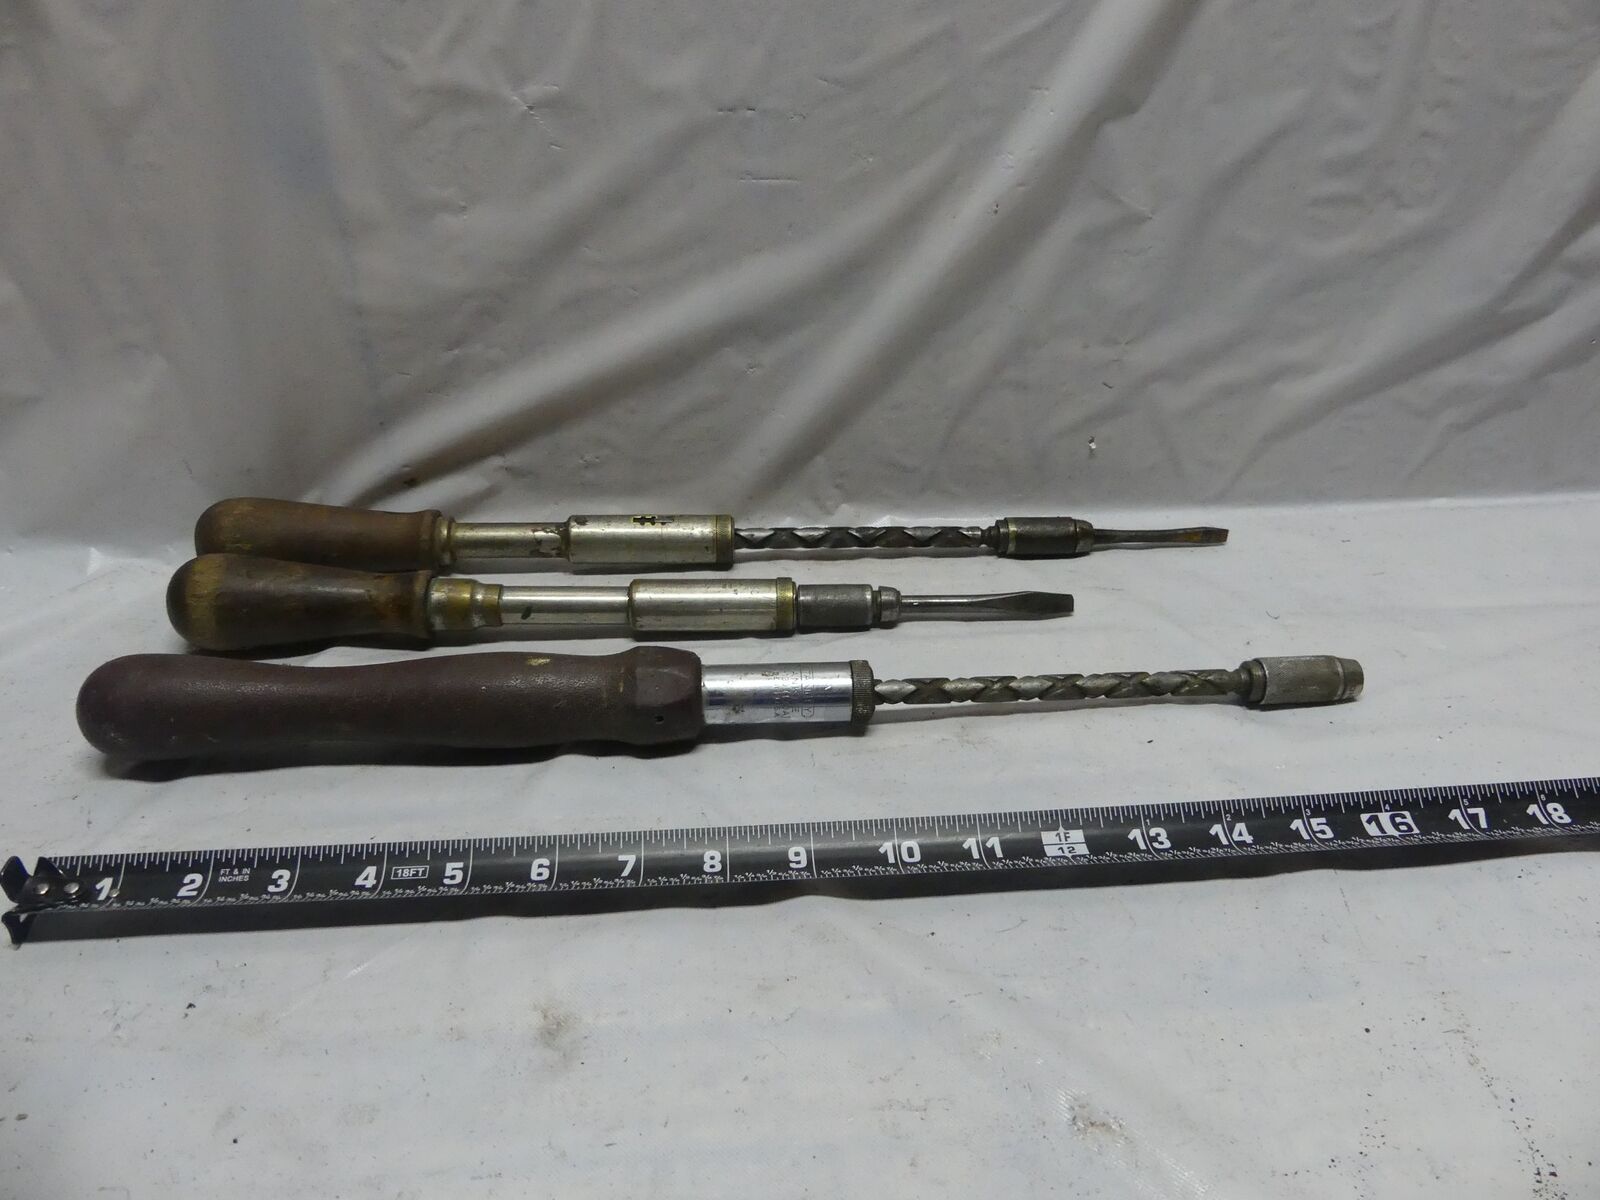 LOT of 3 - Vintage Yankee Screwdriver - Complete but sold for parts